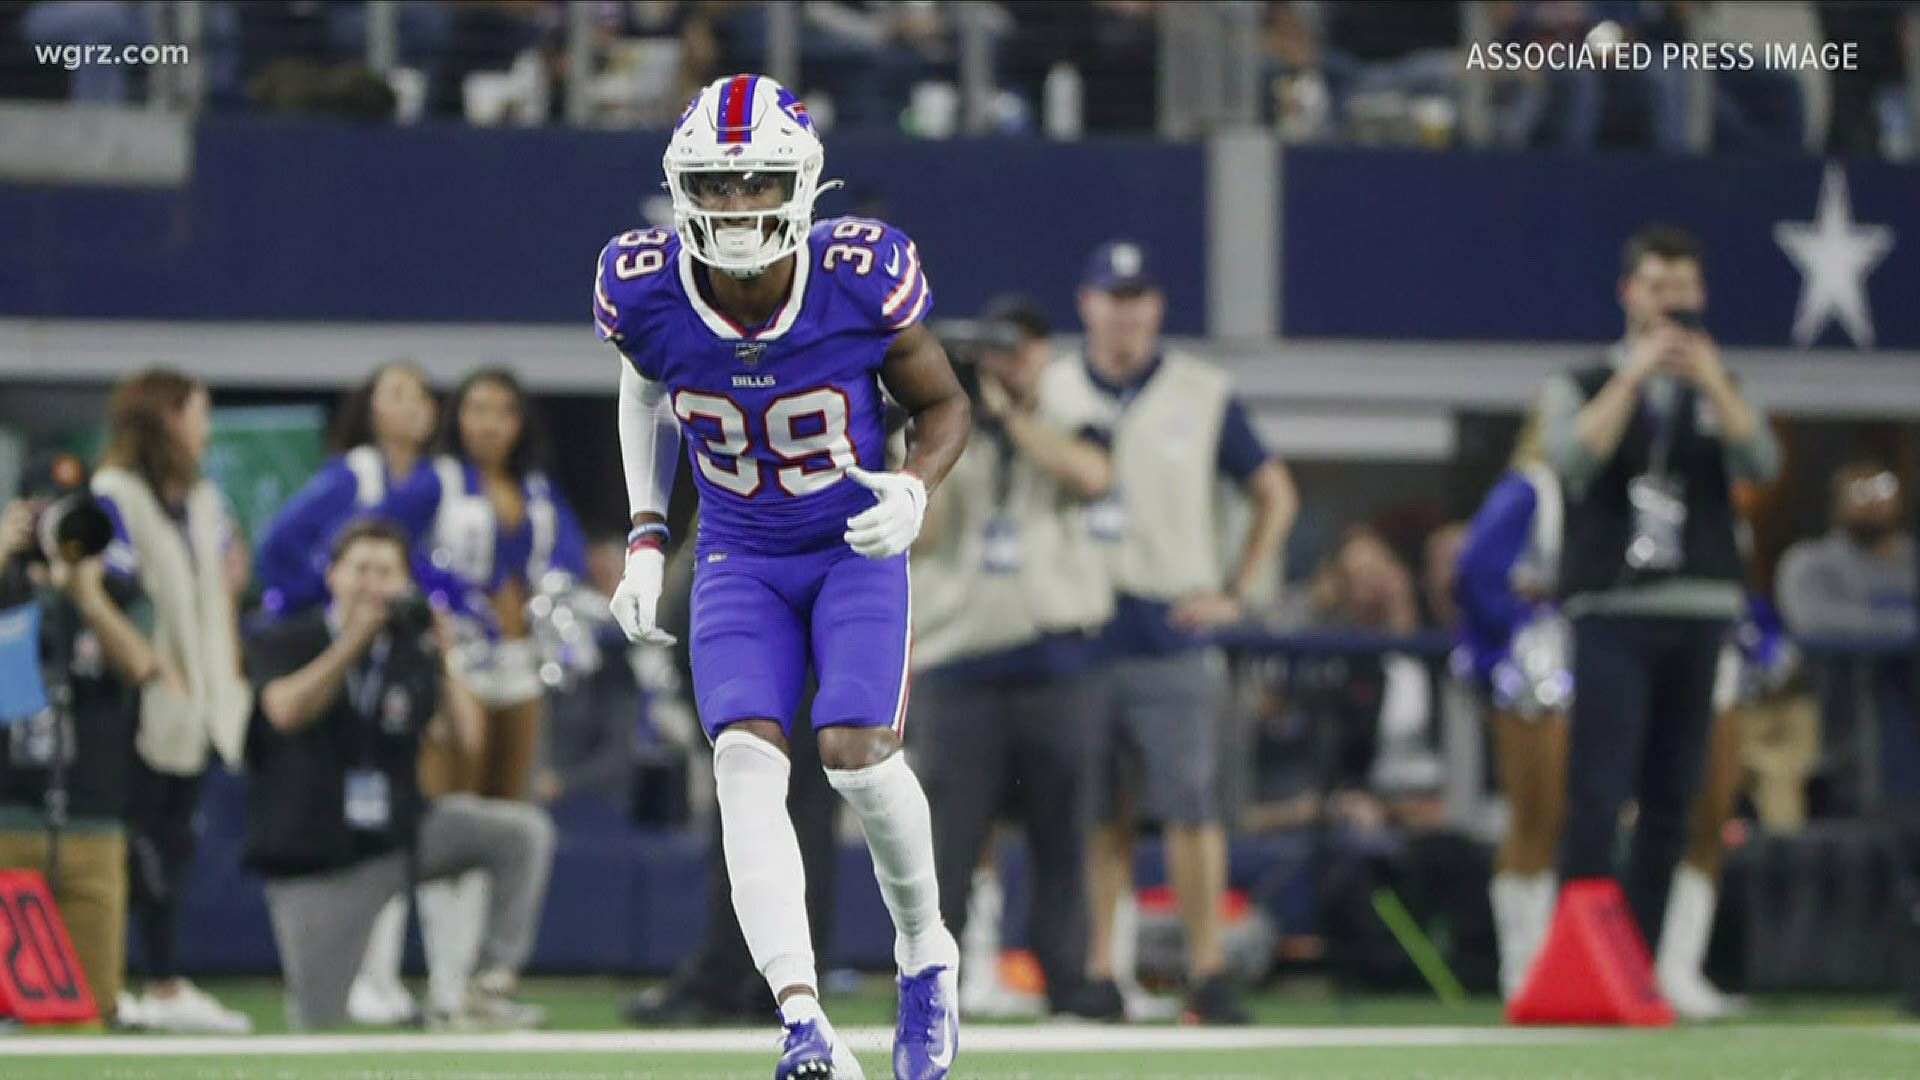 Bills cornerback hosting live Fortnite stream to raise funds for the American Cancer Society